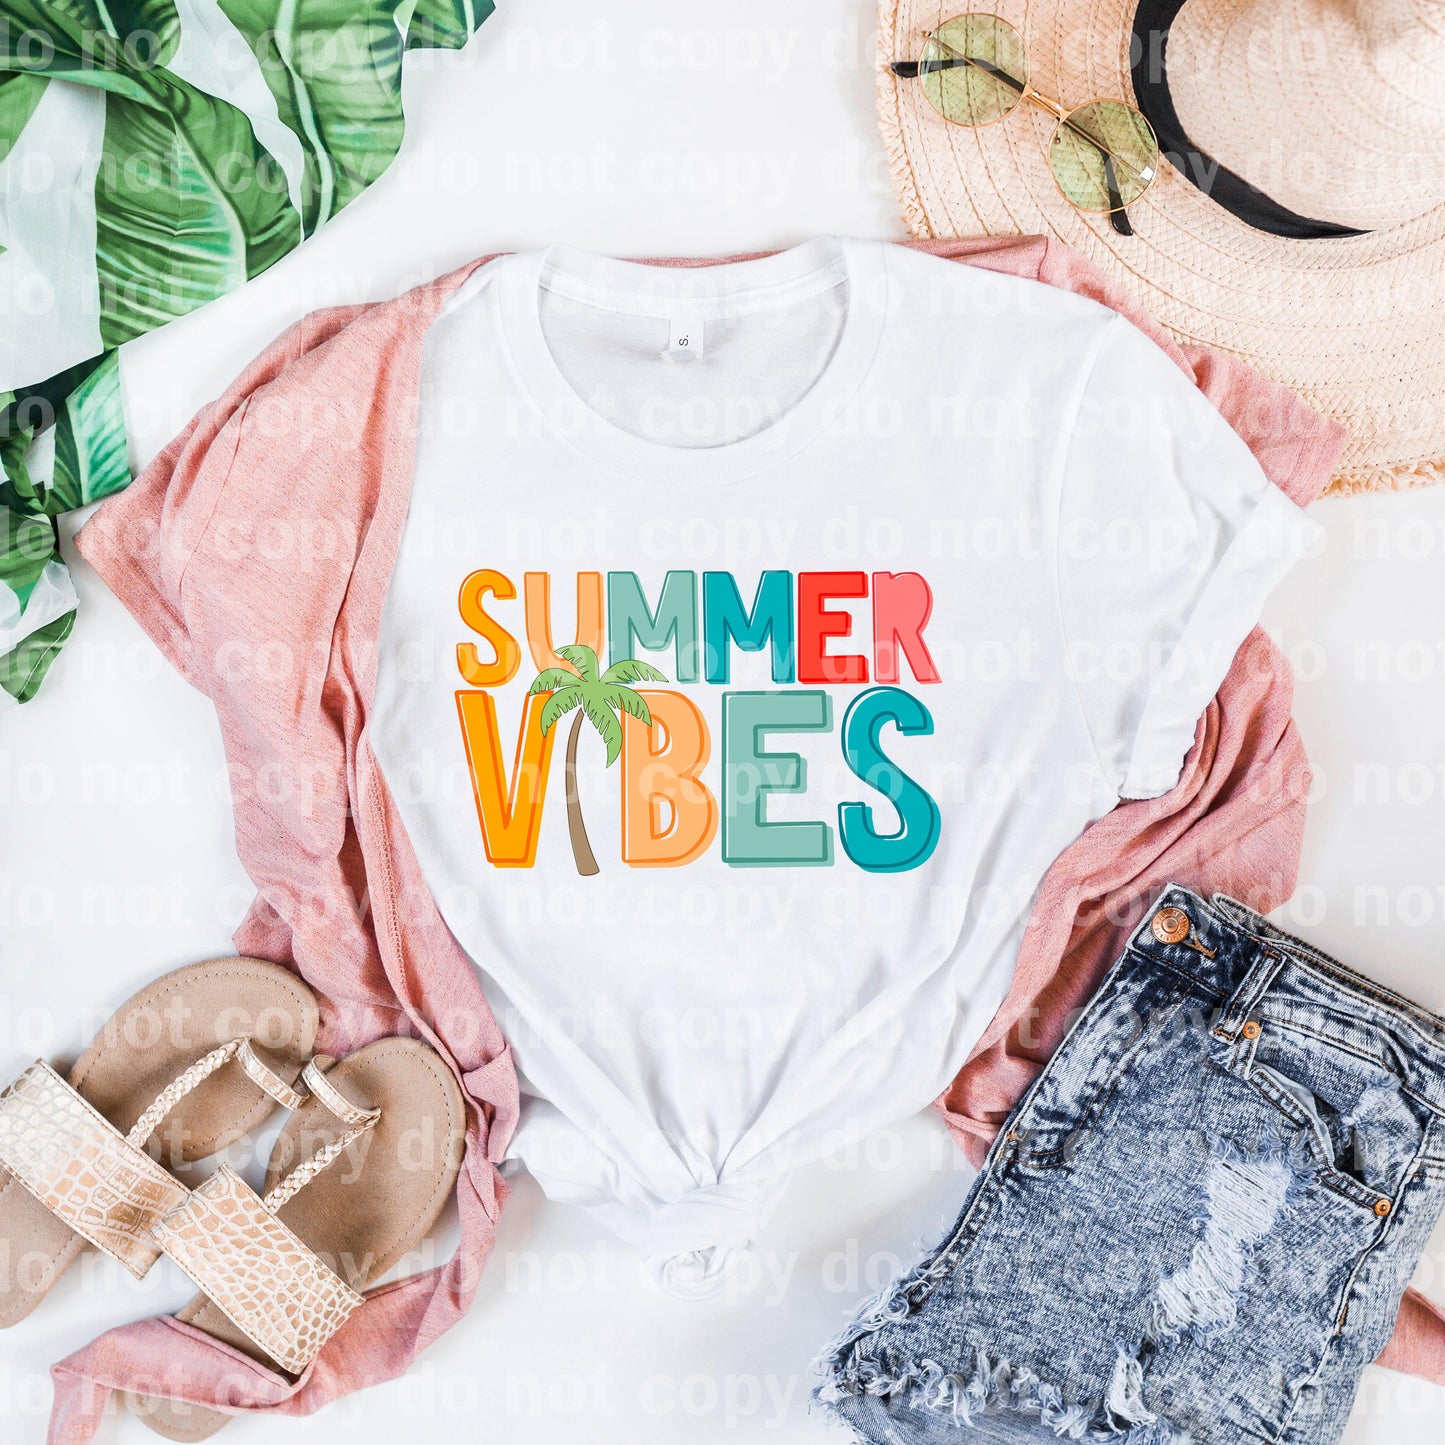 Summer Vibes with Tree Dream Print or Sublimation Print